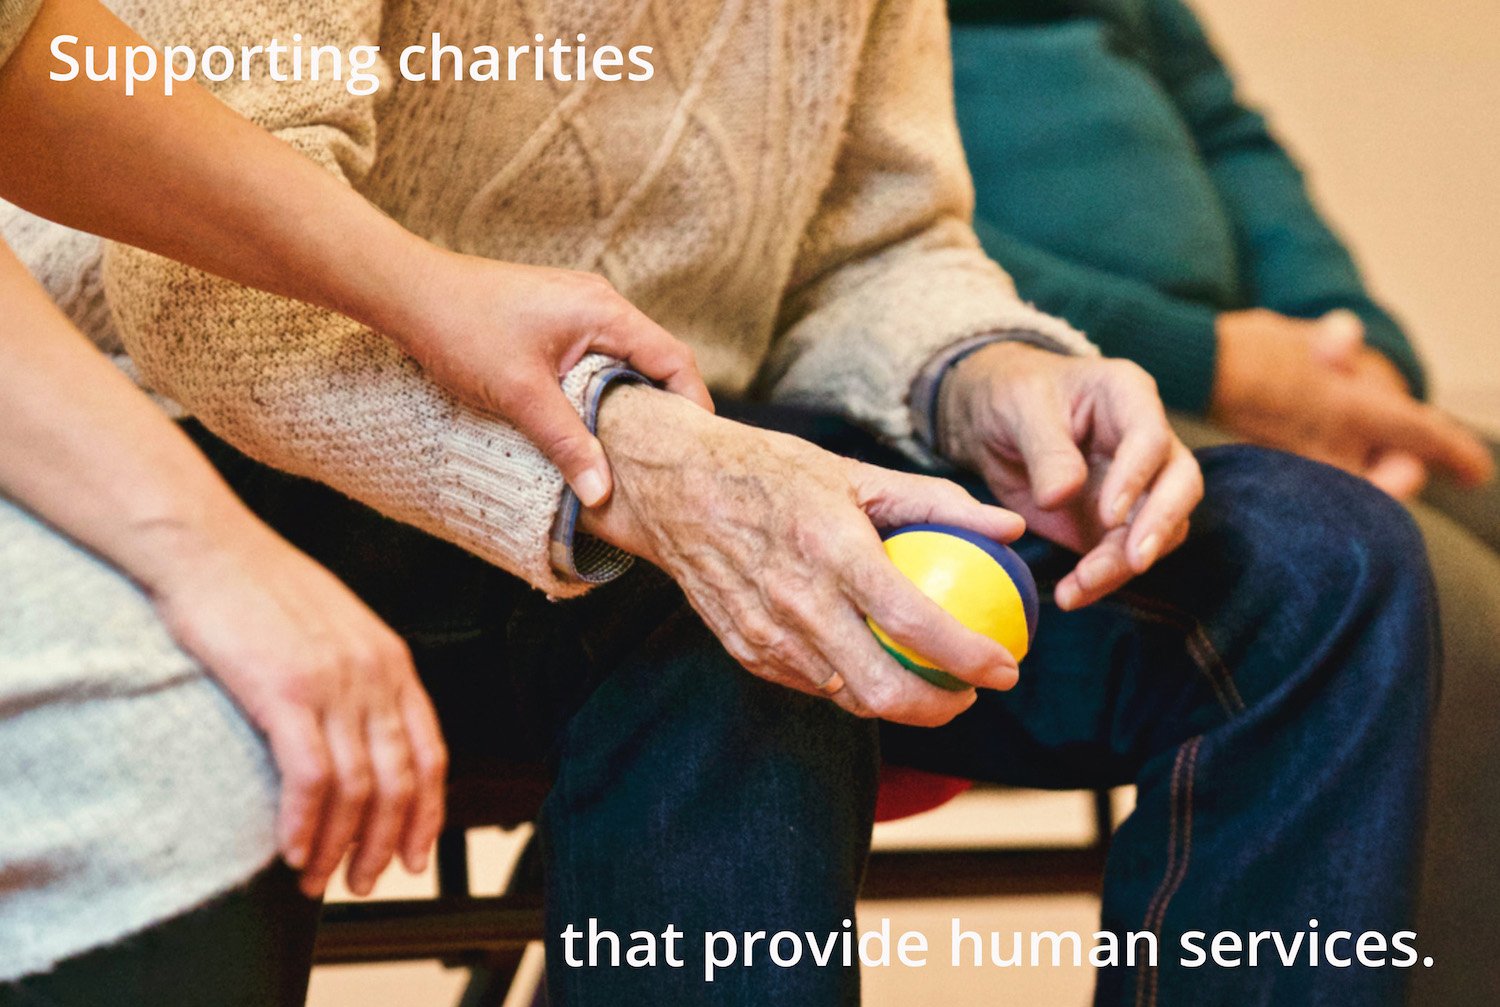 Supporting charities that provide human services